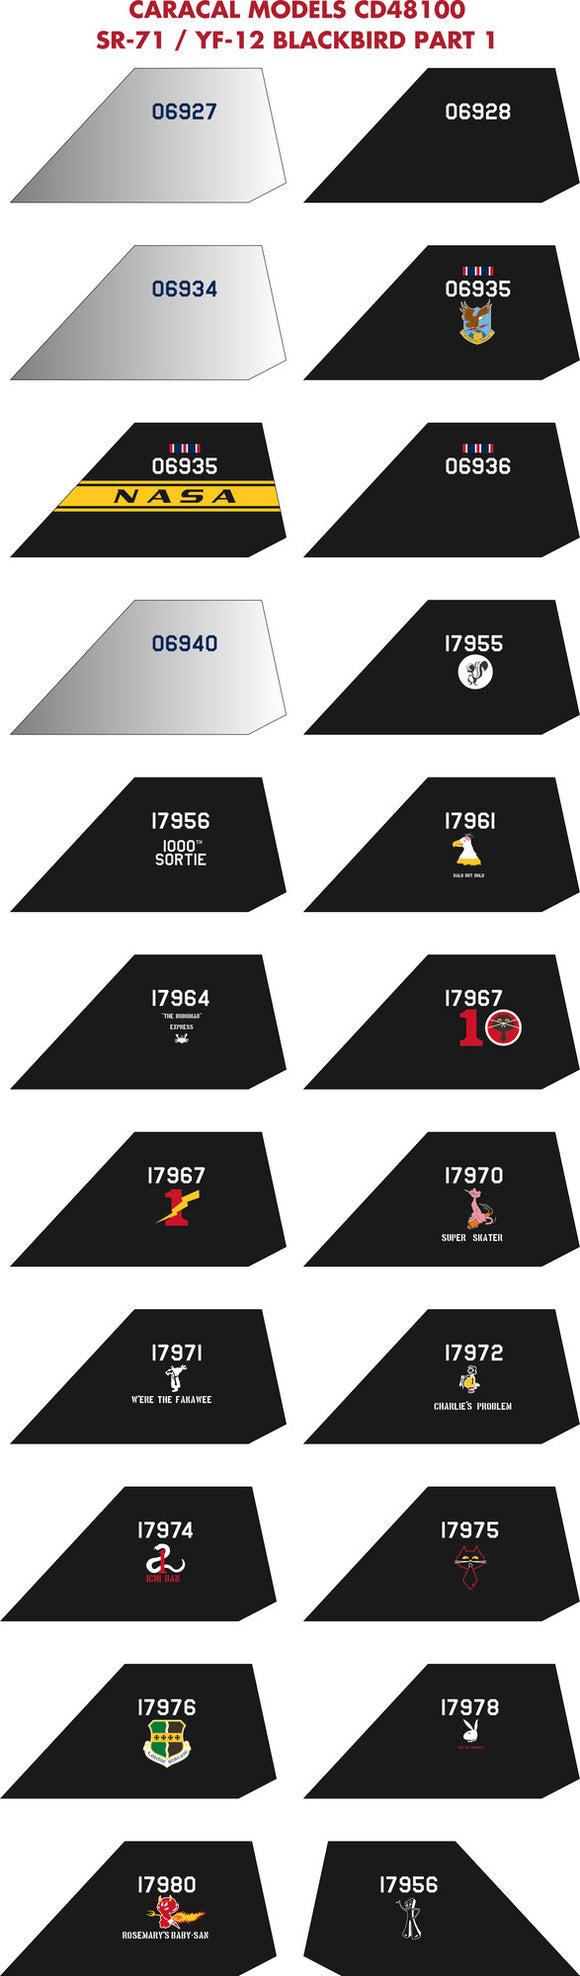 CD48100 1/48 Re-released! Lockheed SR-71 / A-12 / YF-12 Blackbird : Part 1 : Our new SR-71 series is finally here! The first sheet in the series covers the earlier part of SR-71 operations, as well as YF-12, A-12 and M-21.